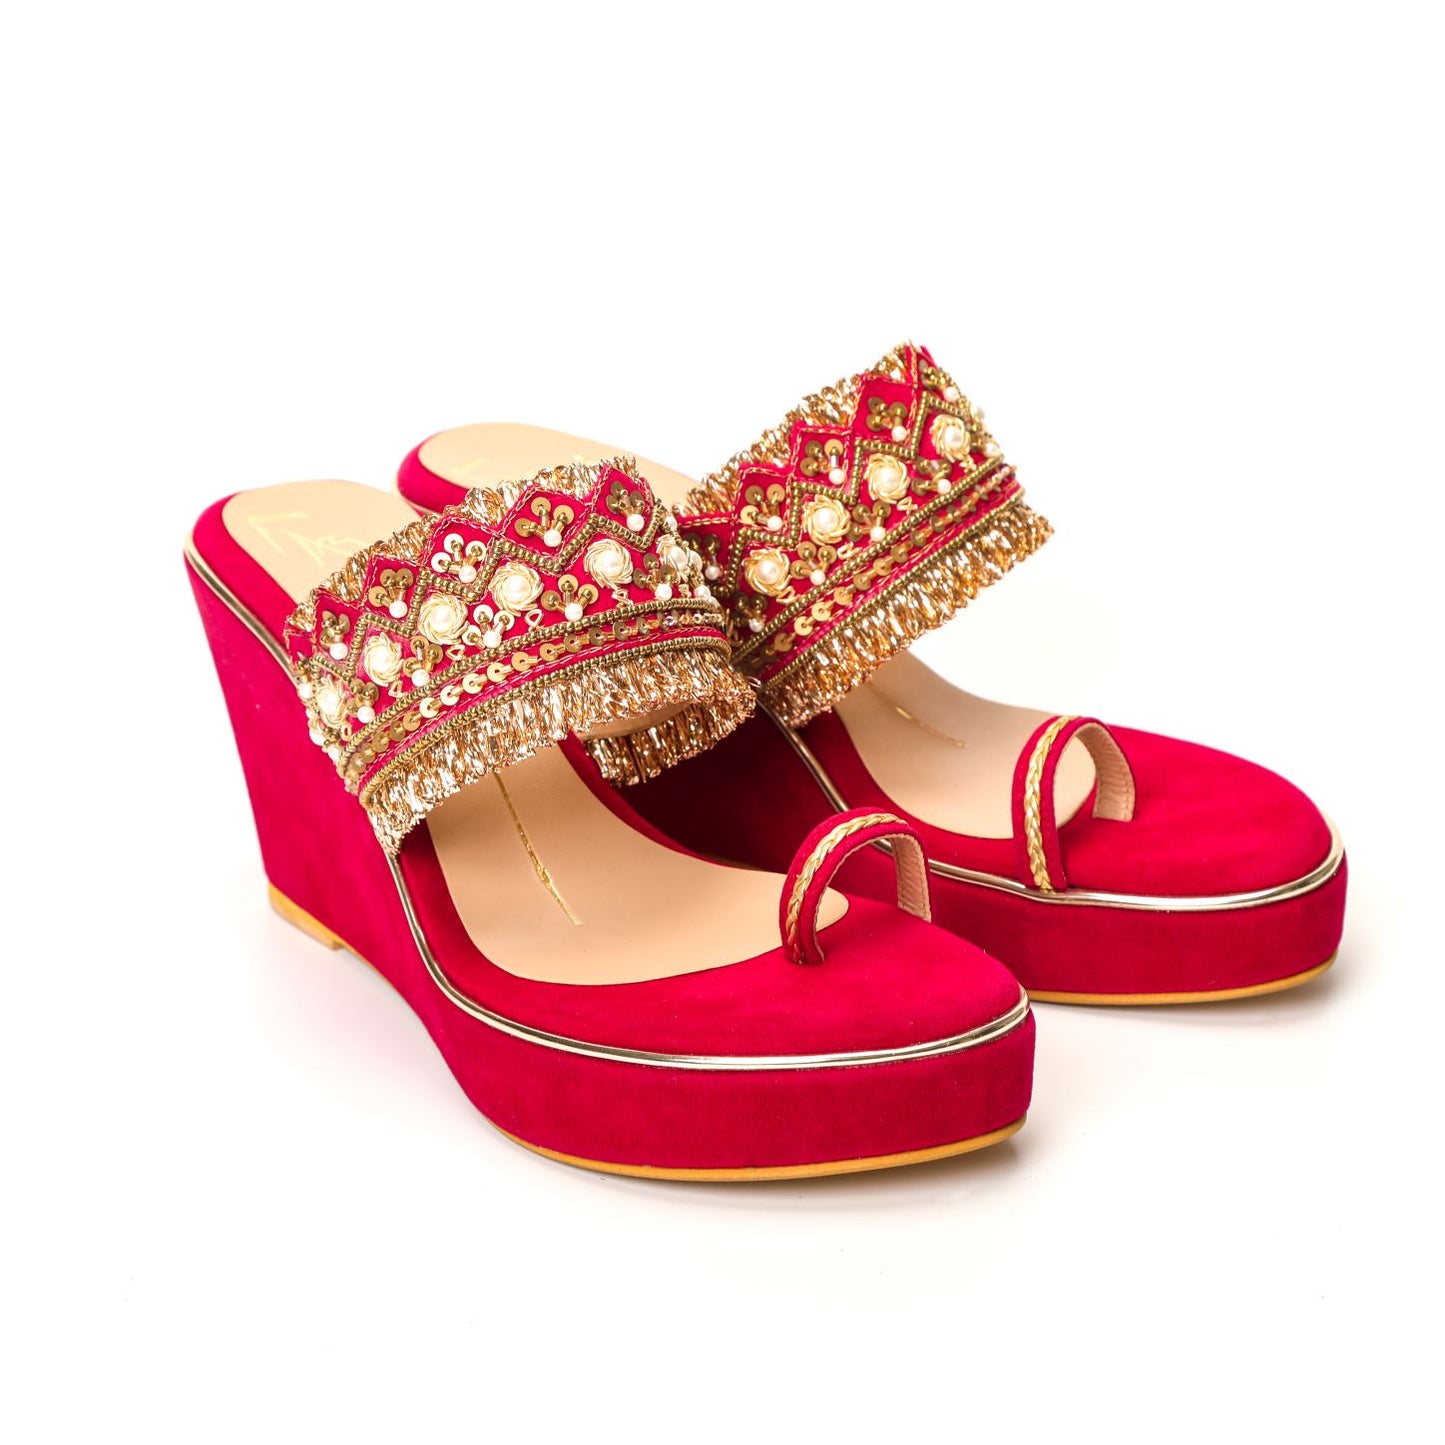 Red Embroidered Wedges